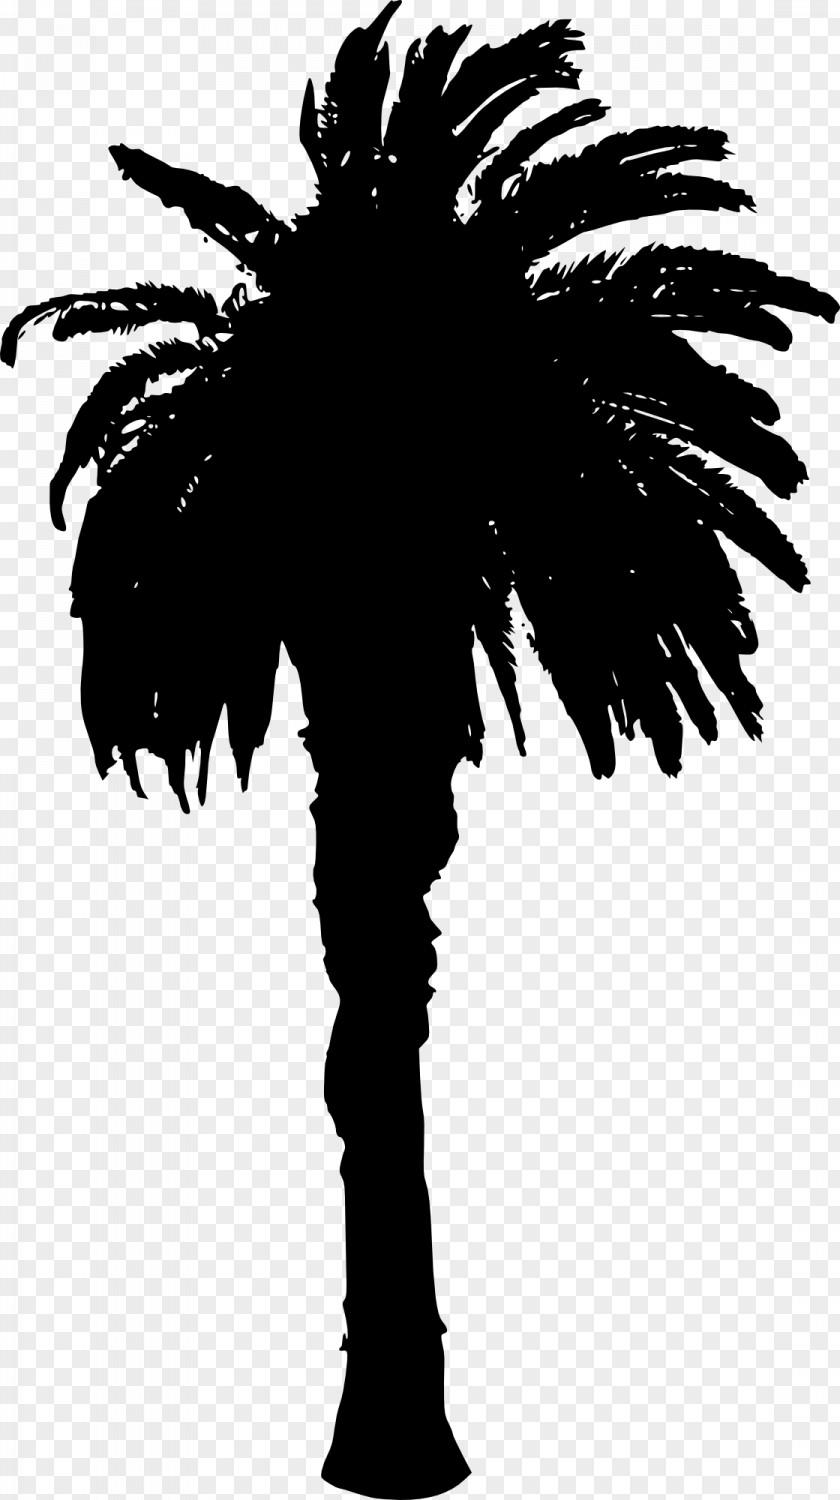 Palm Vector Asian Palmyra Silhouette Arecaceae PNG